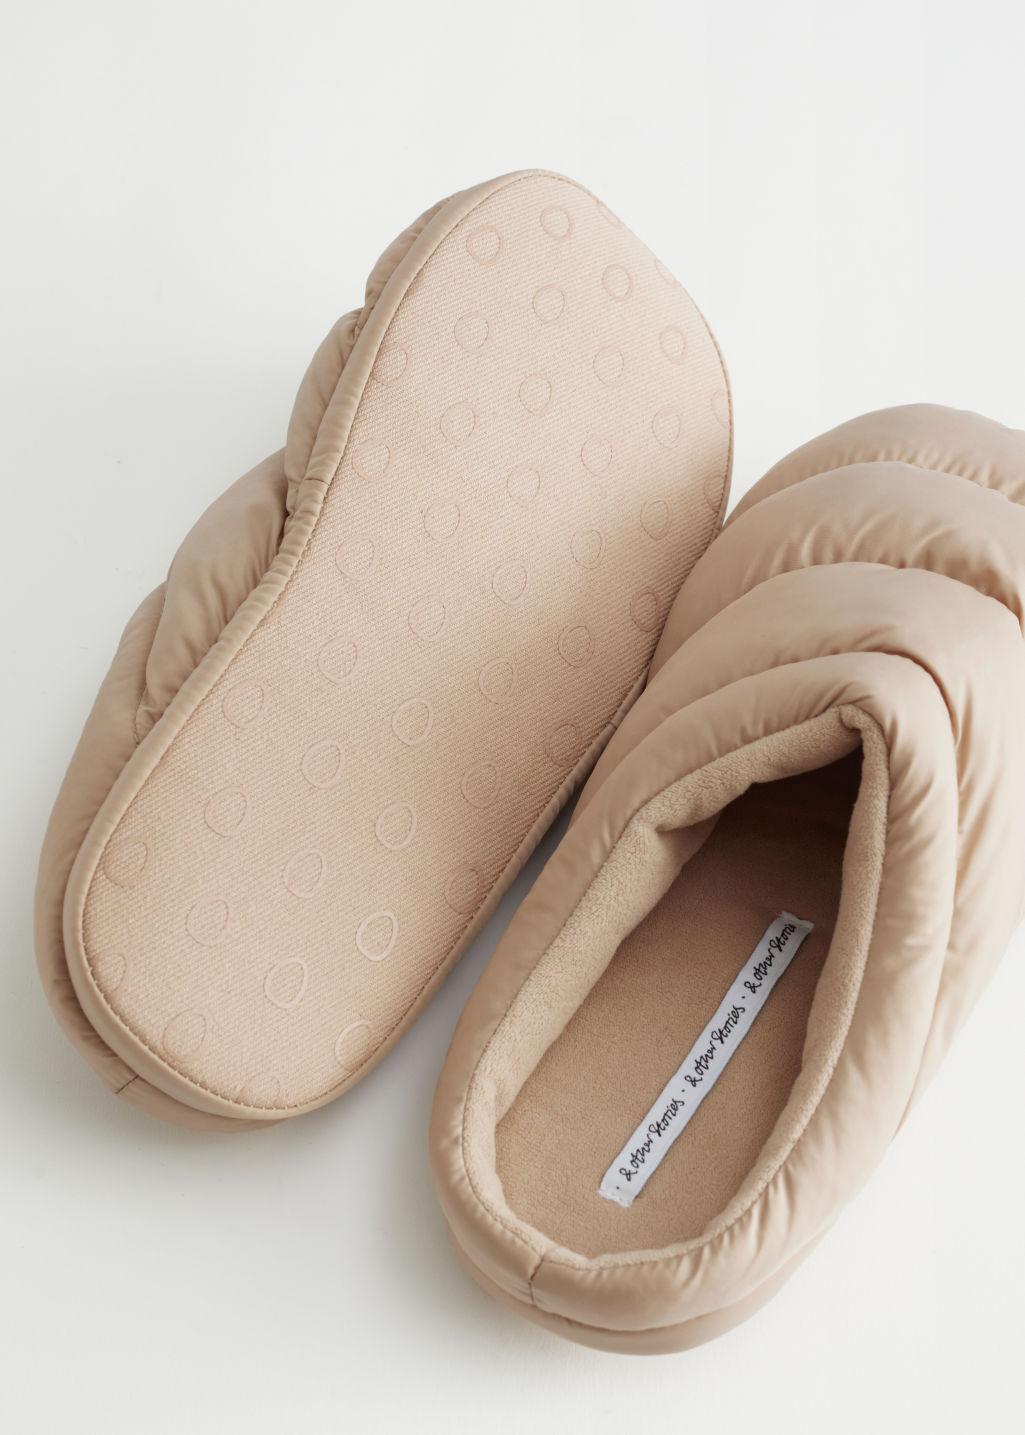 & Other Stories Padded Slippers in Natural | Lyst